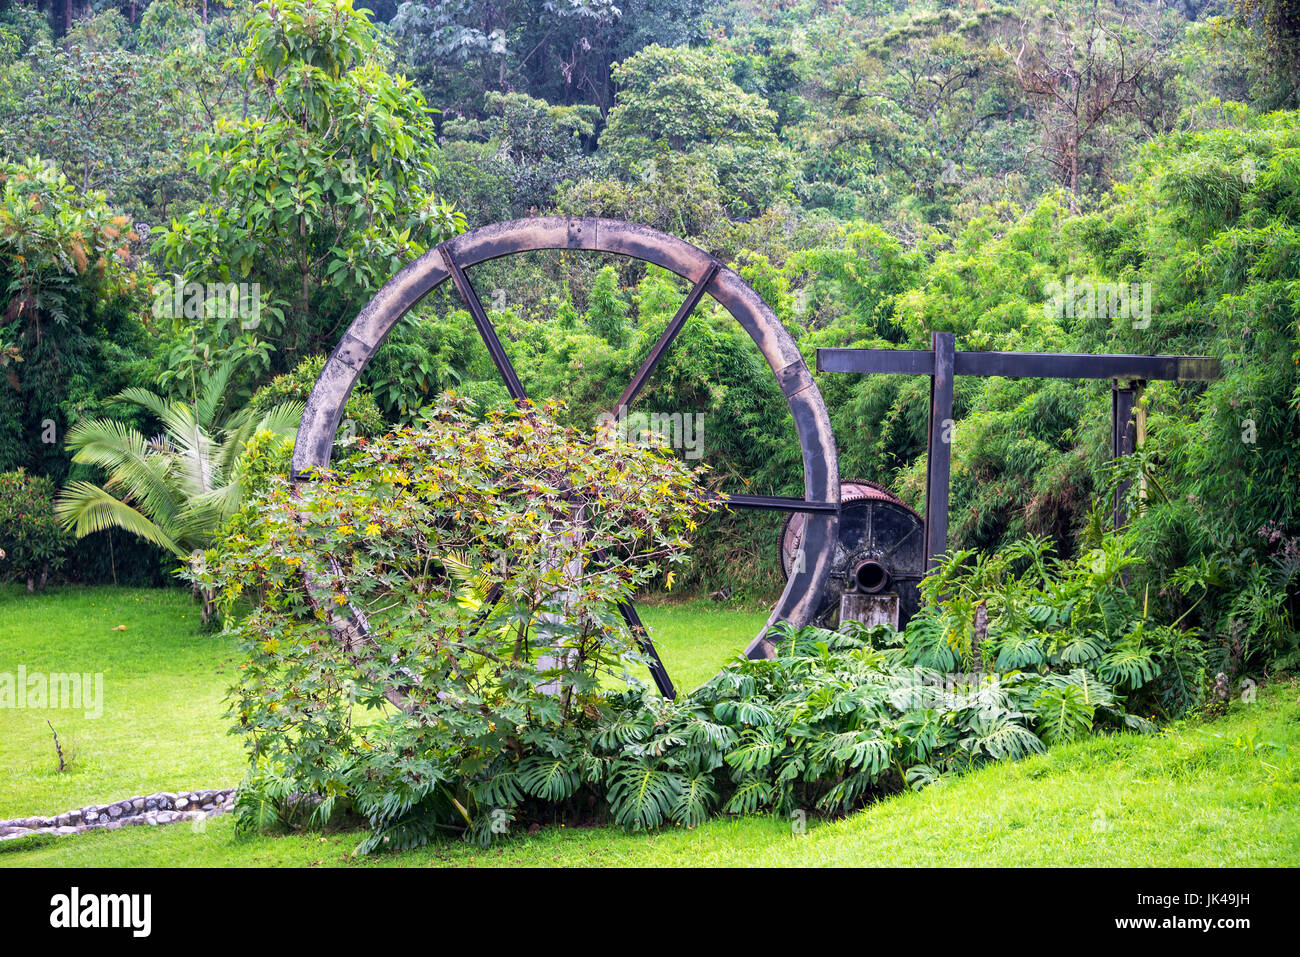 Lush green foliage and old watermill near Manizales, Colombia Stock Photo